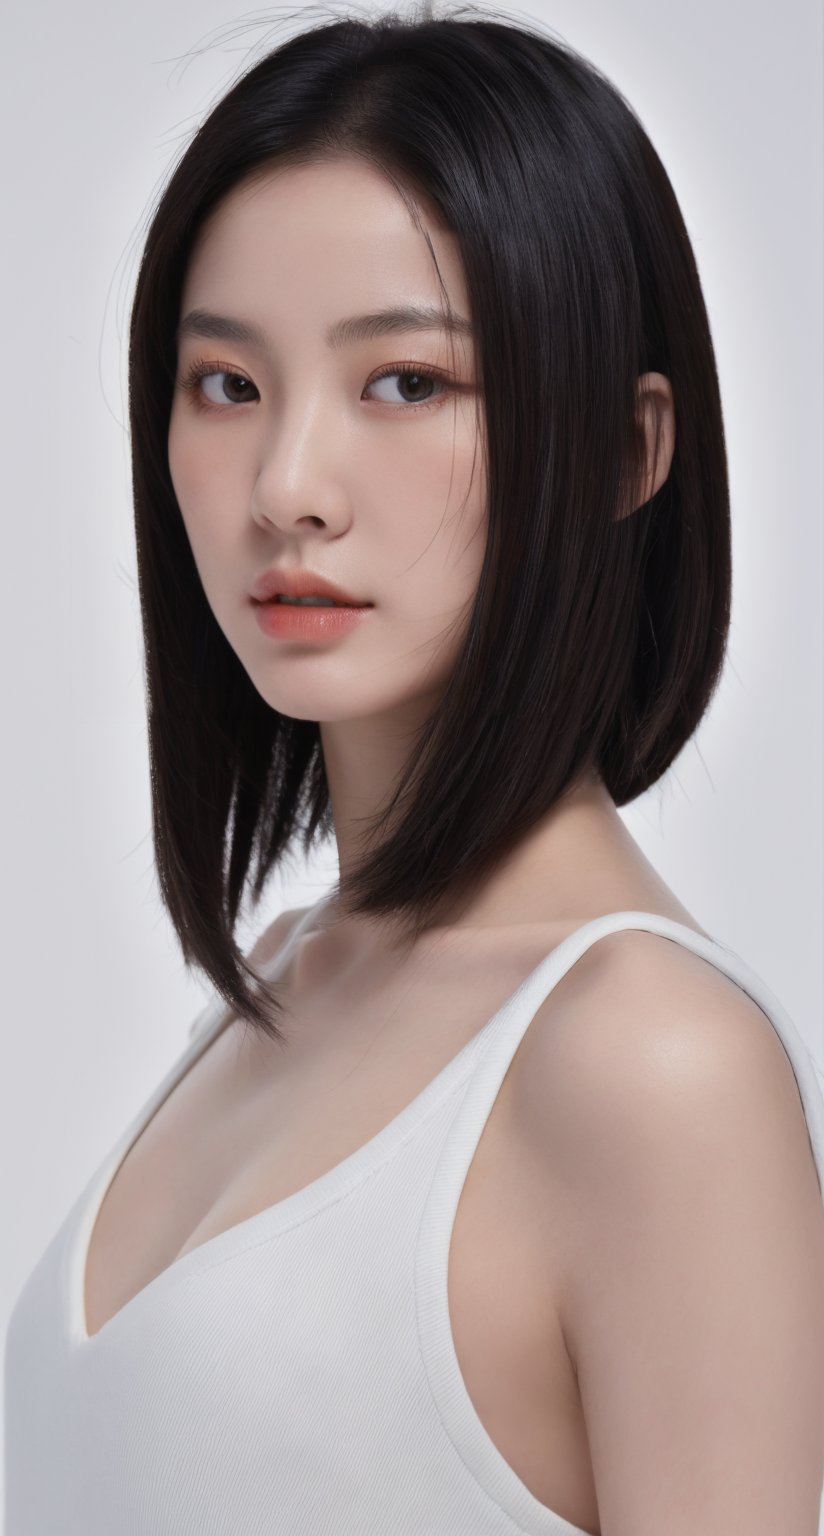 masterpiece,best quality,a Chinese young girl,white background,black hair,long bob hair,face front,close-up:1,studio light,studio,side light,makeup portrait,wear white top,